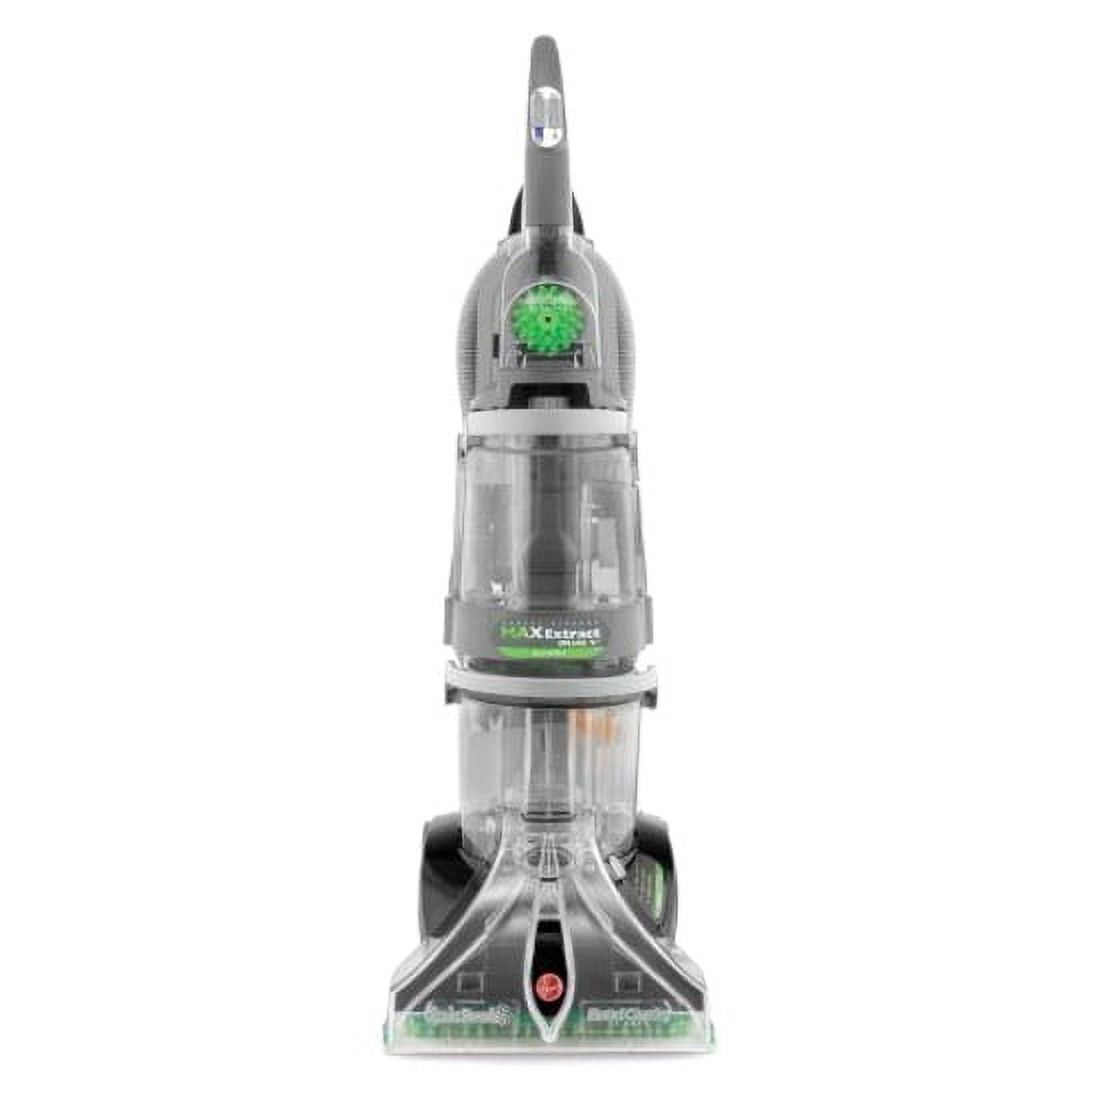 Hoover Steamvac F7412900 Dual V Upright Vacuum Cleaner - image 1 of 5